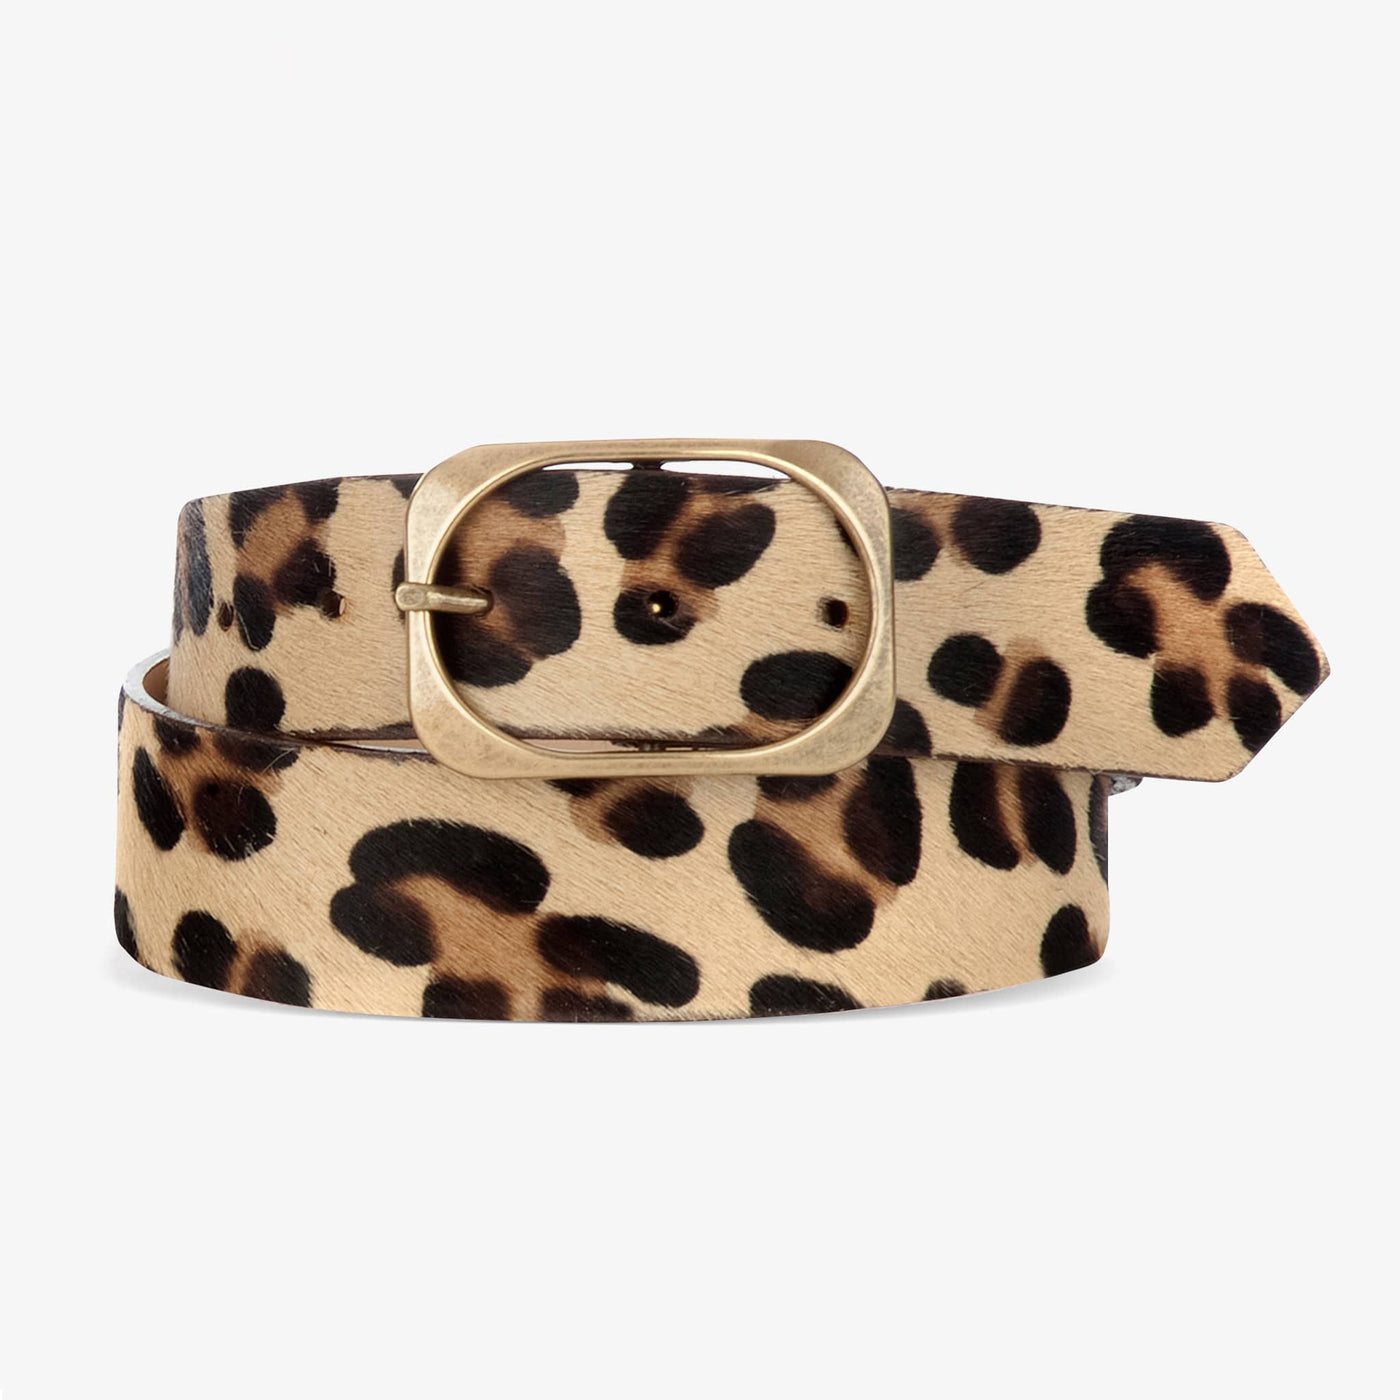 Oona Hair-on Leopard BRAVE Leather Belt -- Custom Made for You